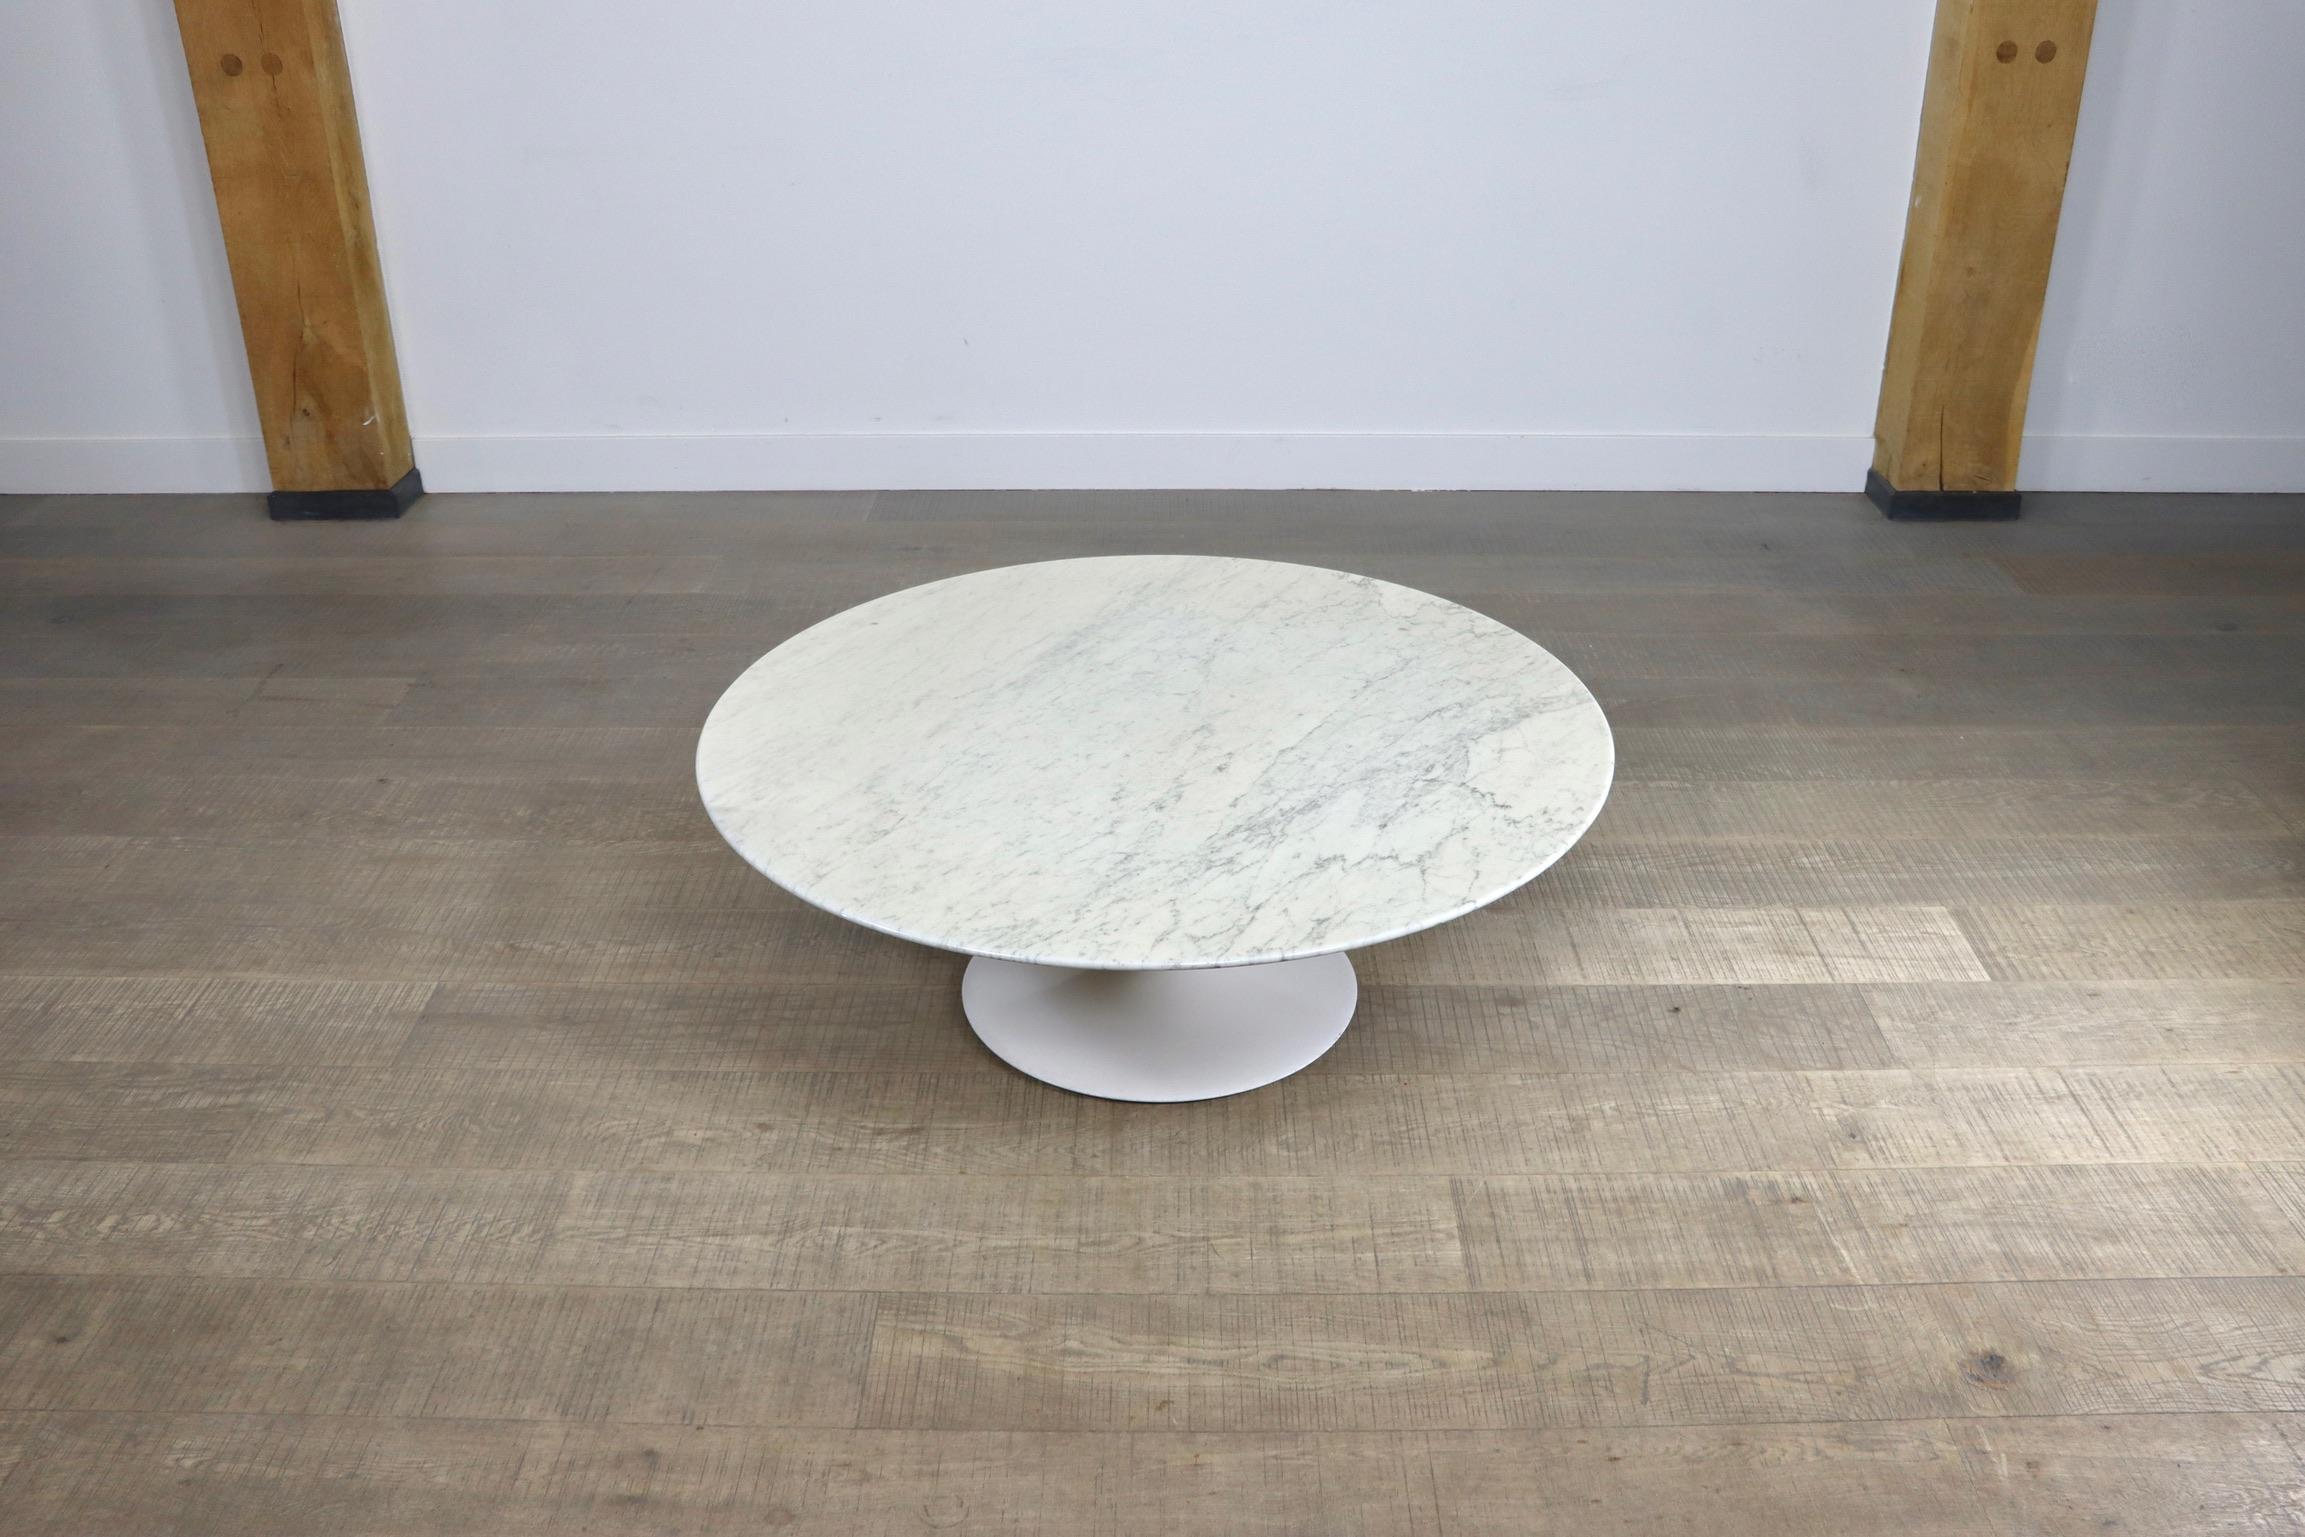 Nice vintage white marble tulip coffee table, designed by Eero Saarinen for Knoll International. This timeless design will instantly uplift any seating area with its looks and feel. The round marble table top gives this beautiful design a luxurious